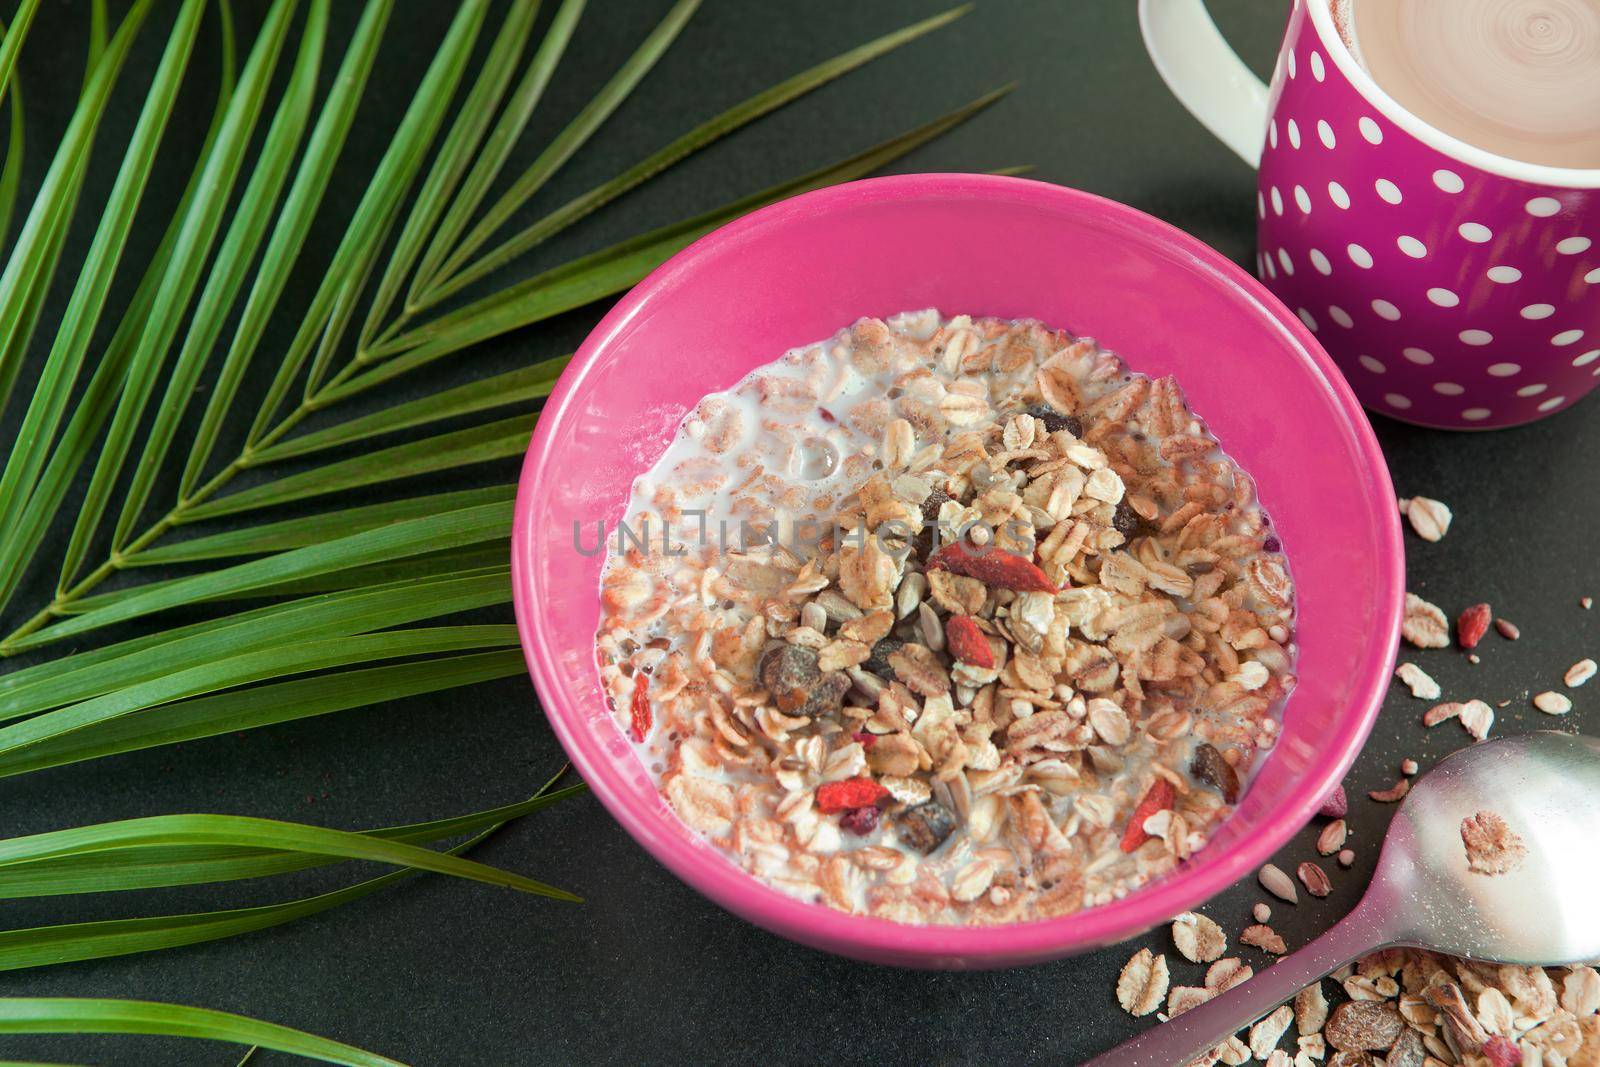 Coffee cup and oatmeal with nuts, milk and dried fruits in violet bowl on black table near green palm leaf. Perfect whole grain breakfast as tasty organic food.